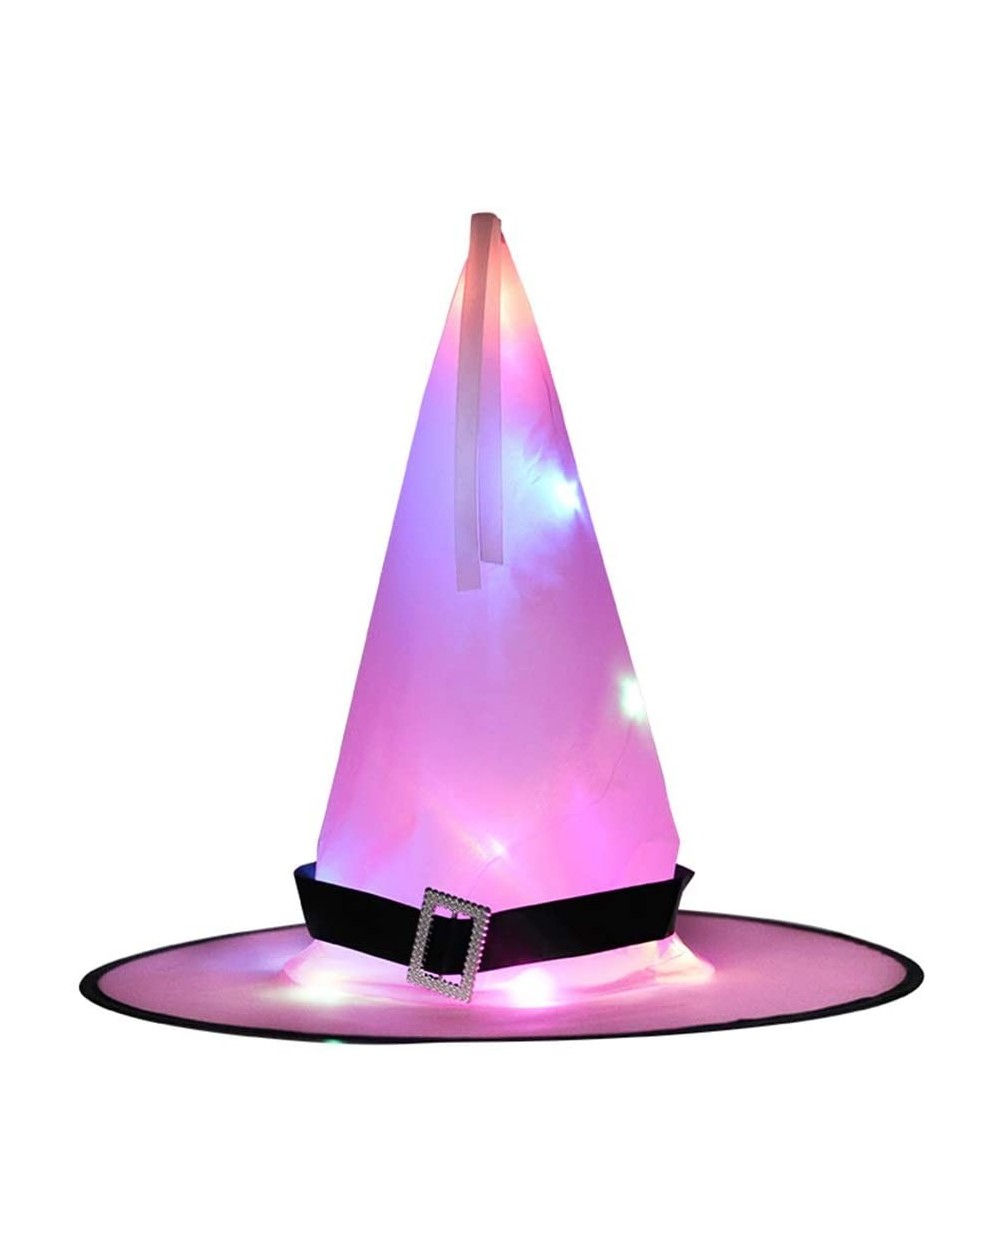 Party Hats Halloween Witch Cap with LED Light Bright Witches Hat Lighting Decoration Glossy - Pink - CT19GDMQH86 $8.98